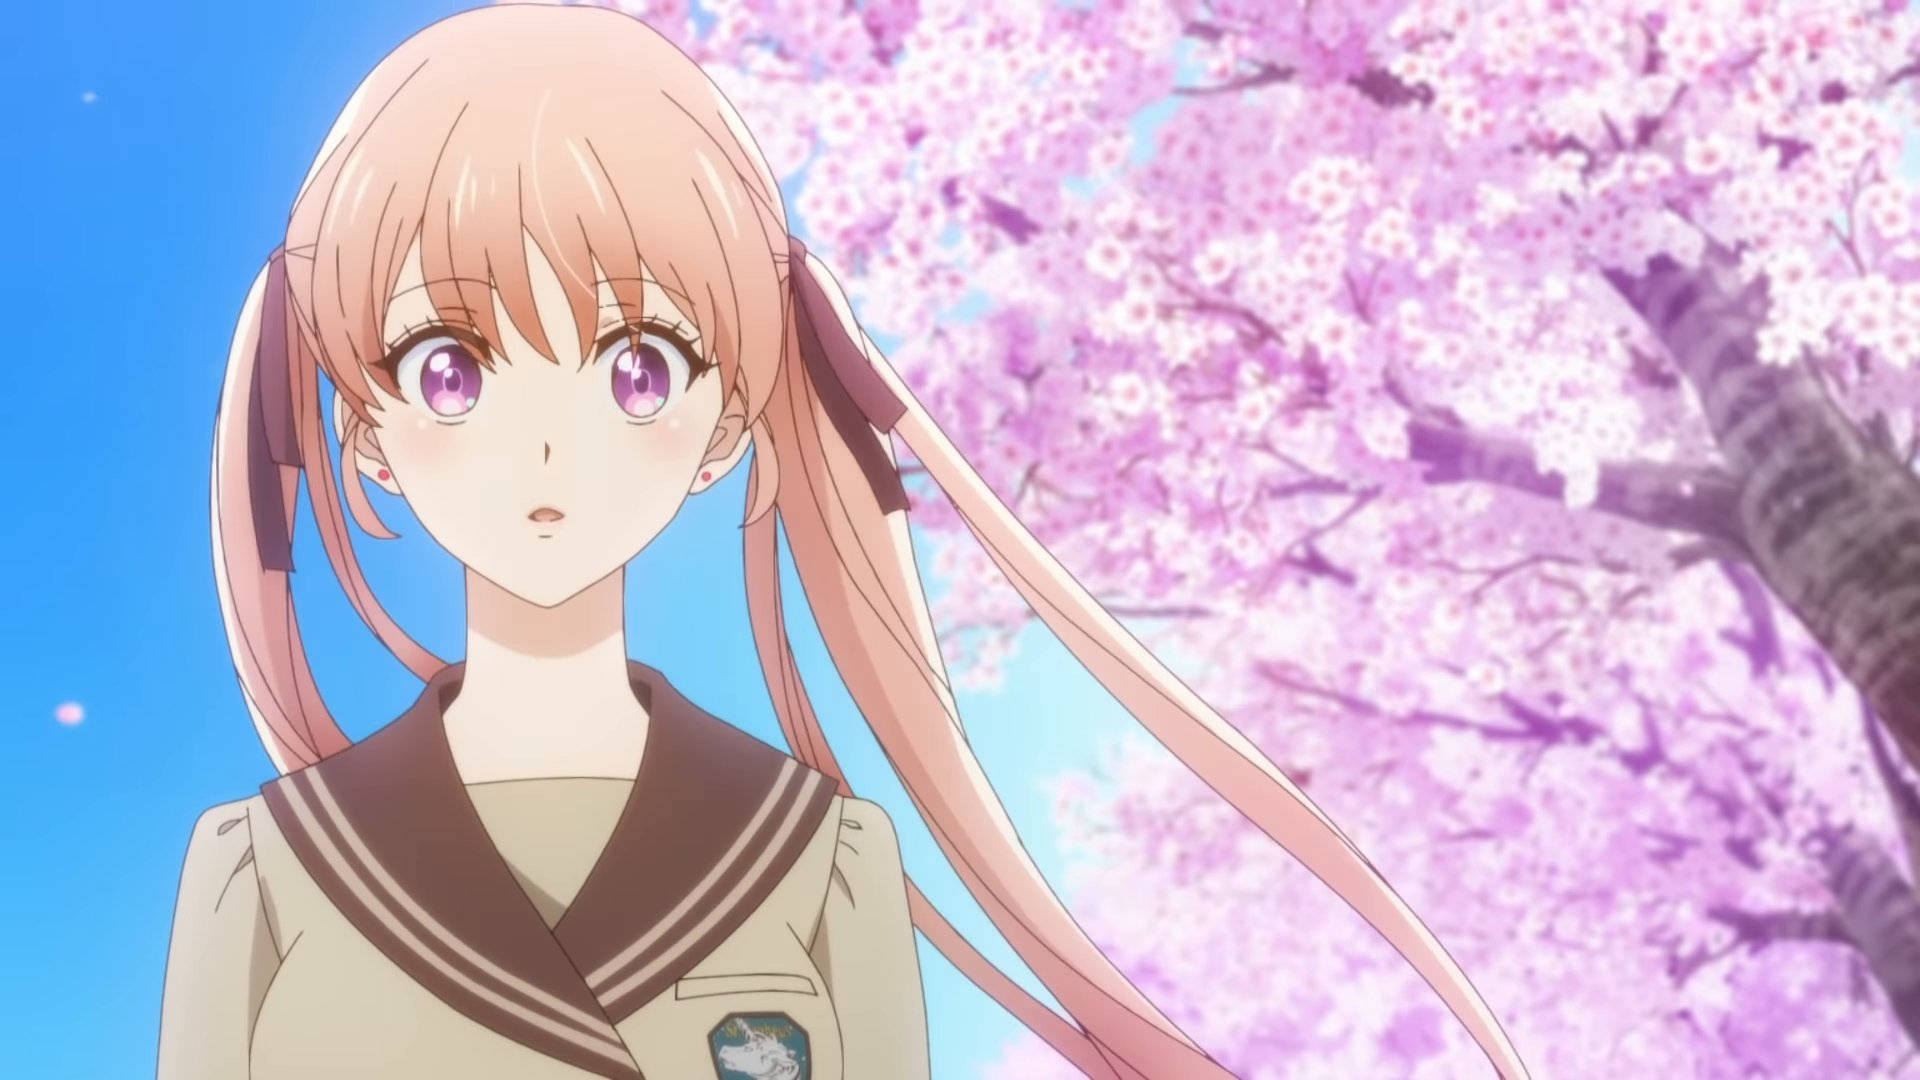 Erika Surrounded By Cherry Blossoms - A Couple Of Cuckoos Anime Scene Background